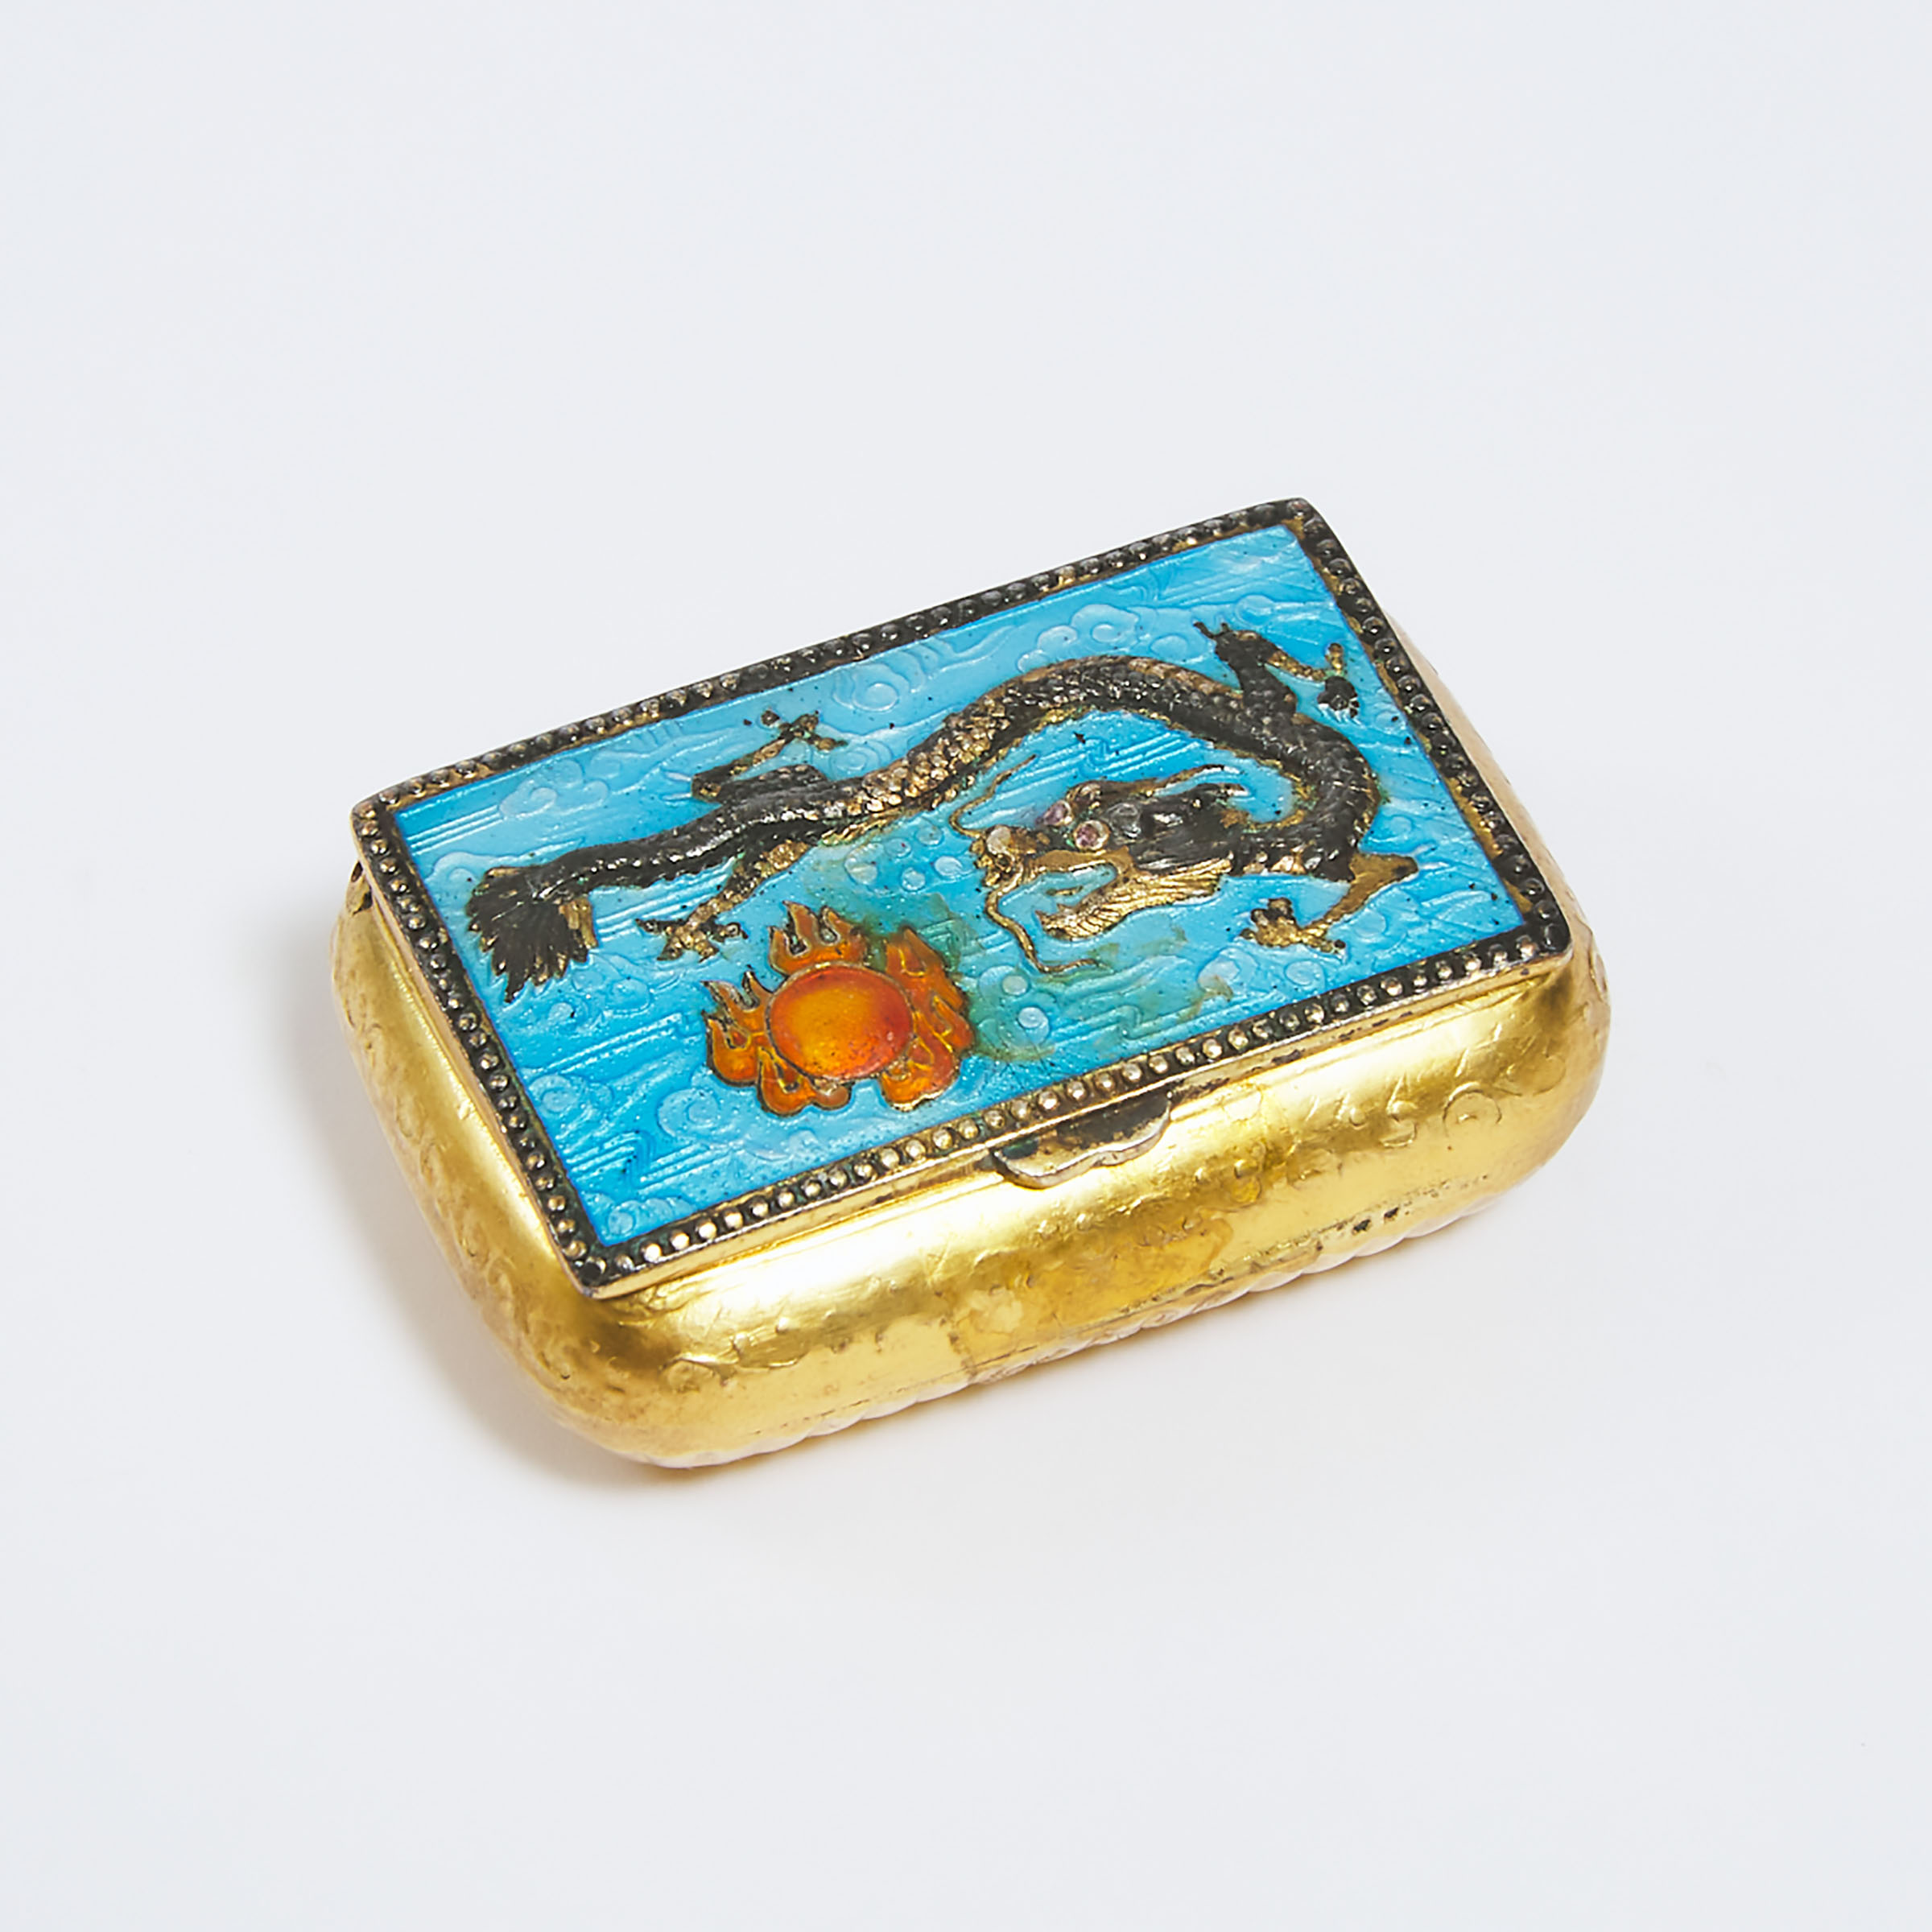 A Small Gilt Enameled Silvered 3ac767